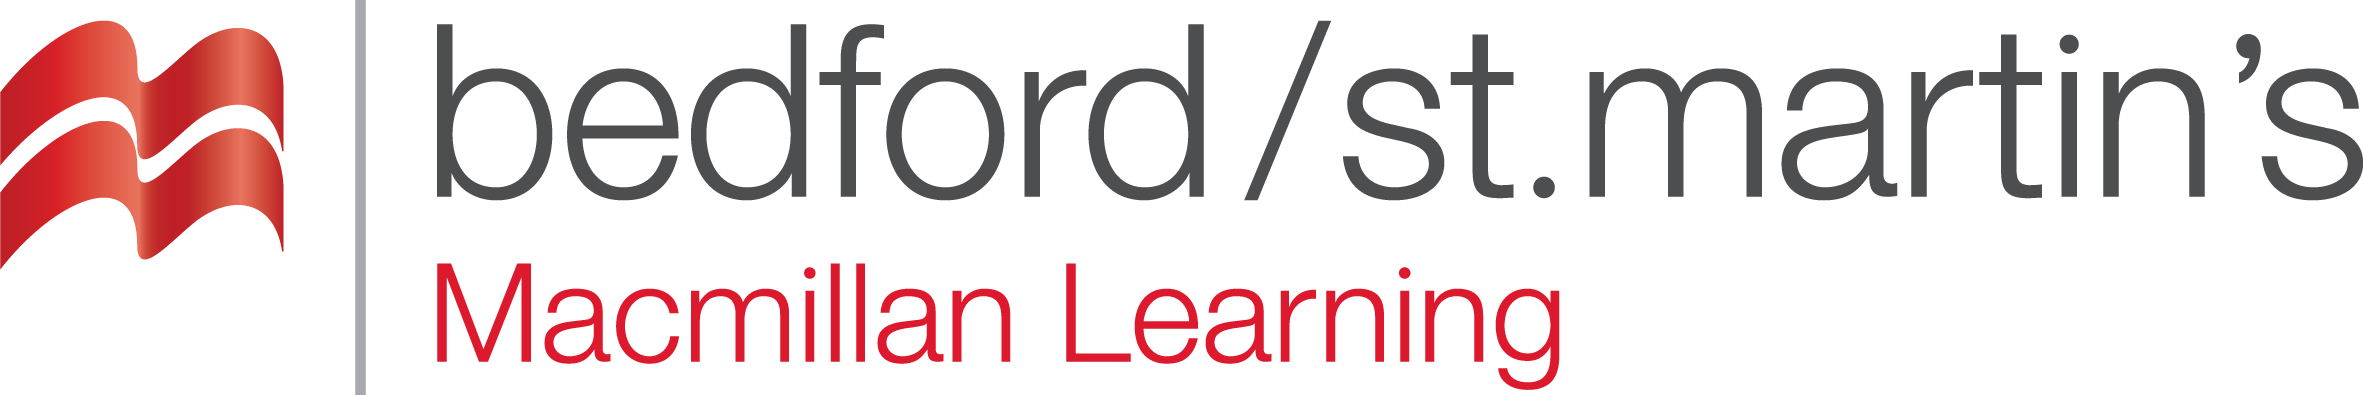 Bedford, St. Martin's, and Macmillan Learning Logo